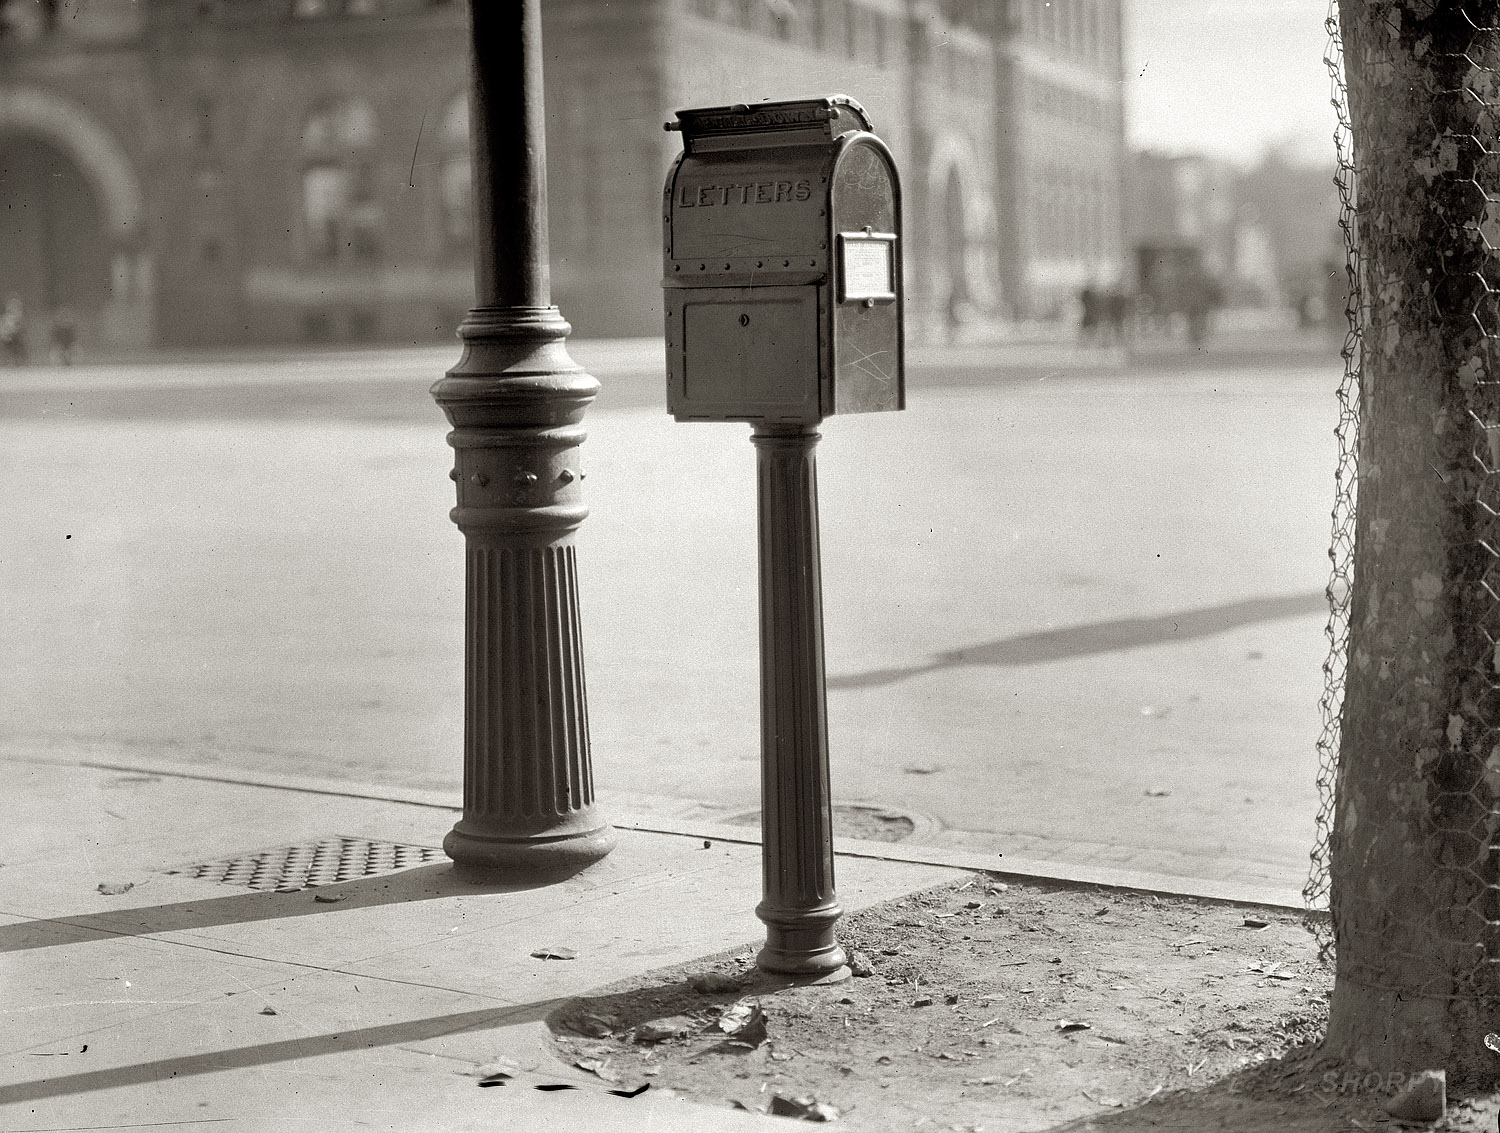 Washington, 1911. "Post Office Department mail box." In front of the Old Post Office building. Harris & Ewing Collection glass negative. View full size.